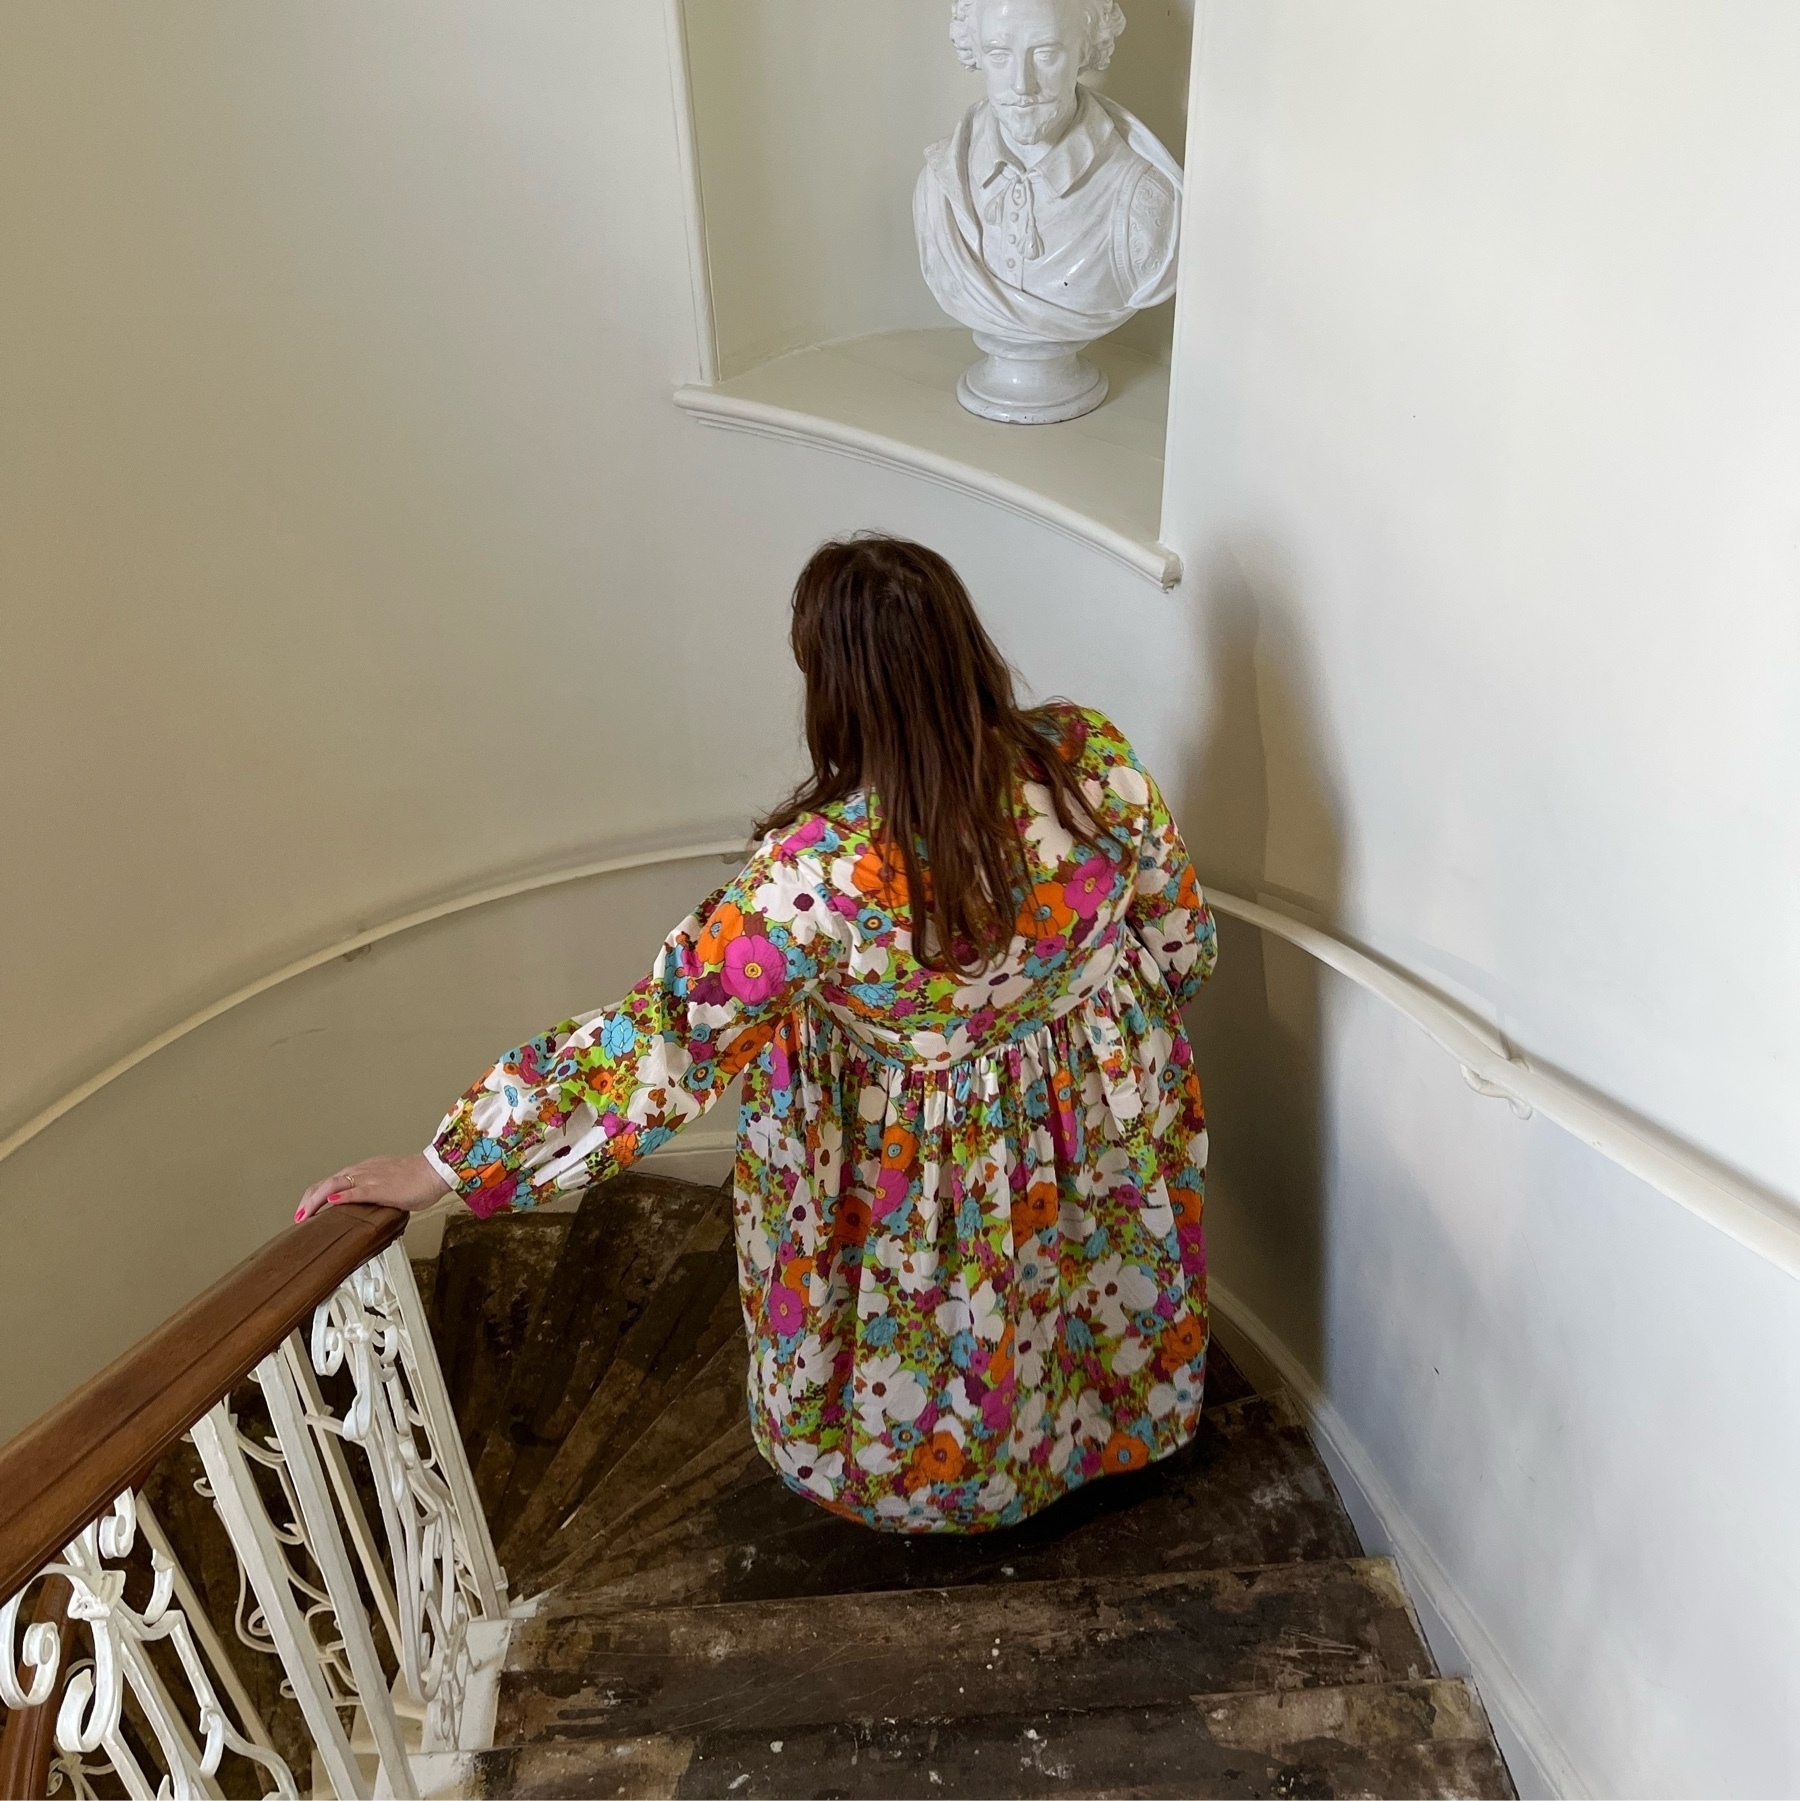 Anna walking down the stairs wearing a flowery dress